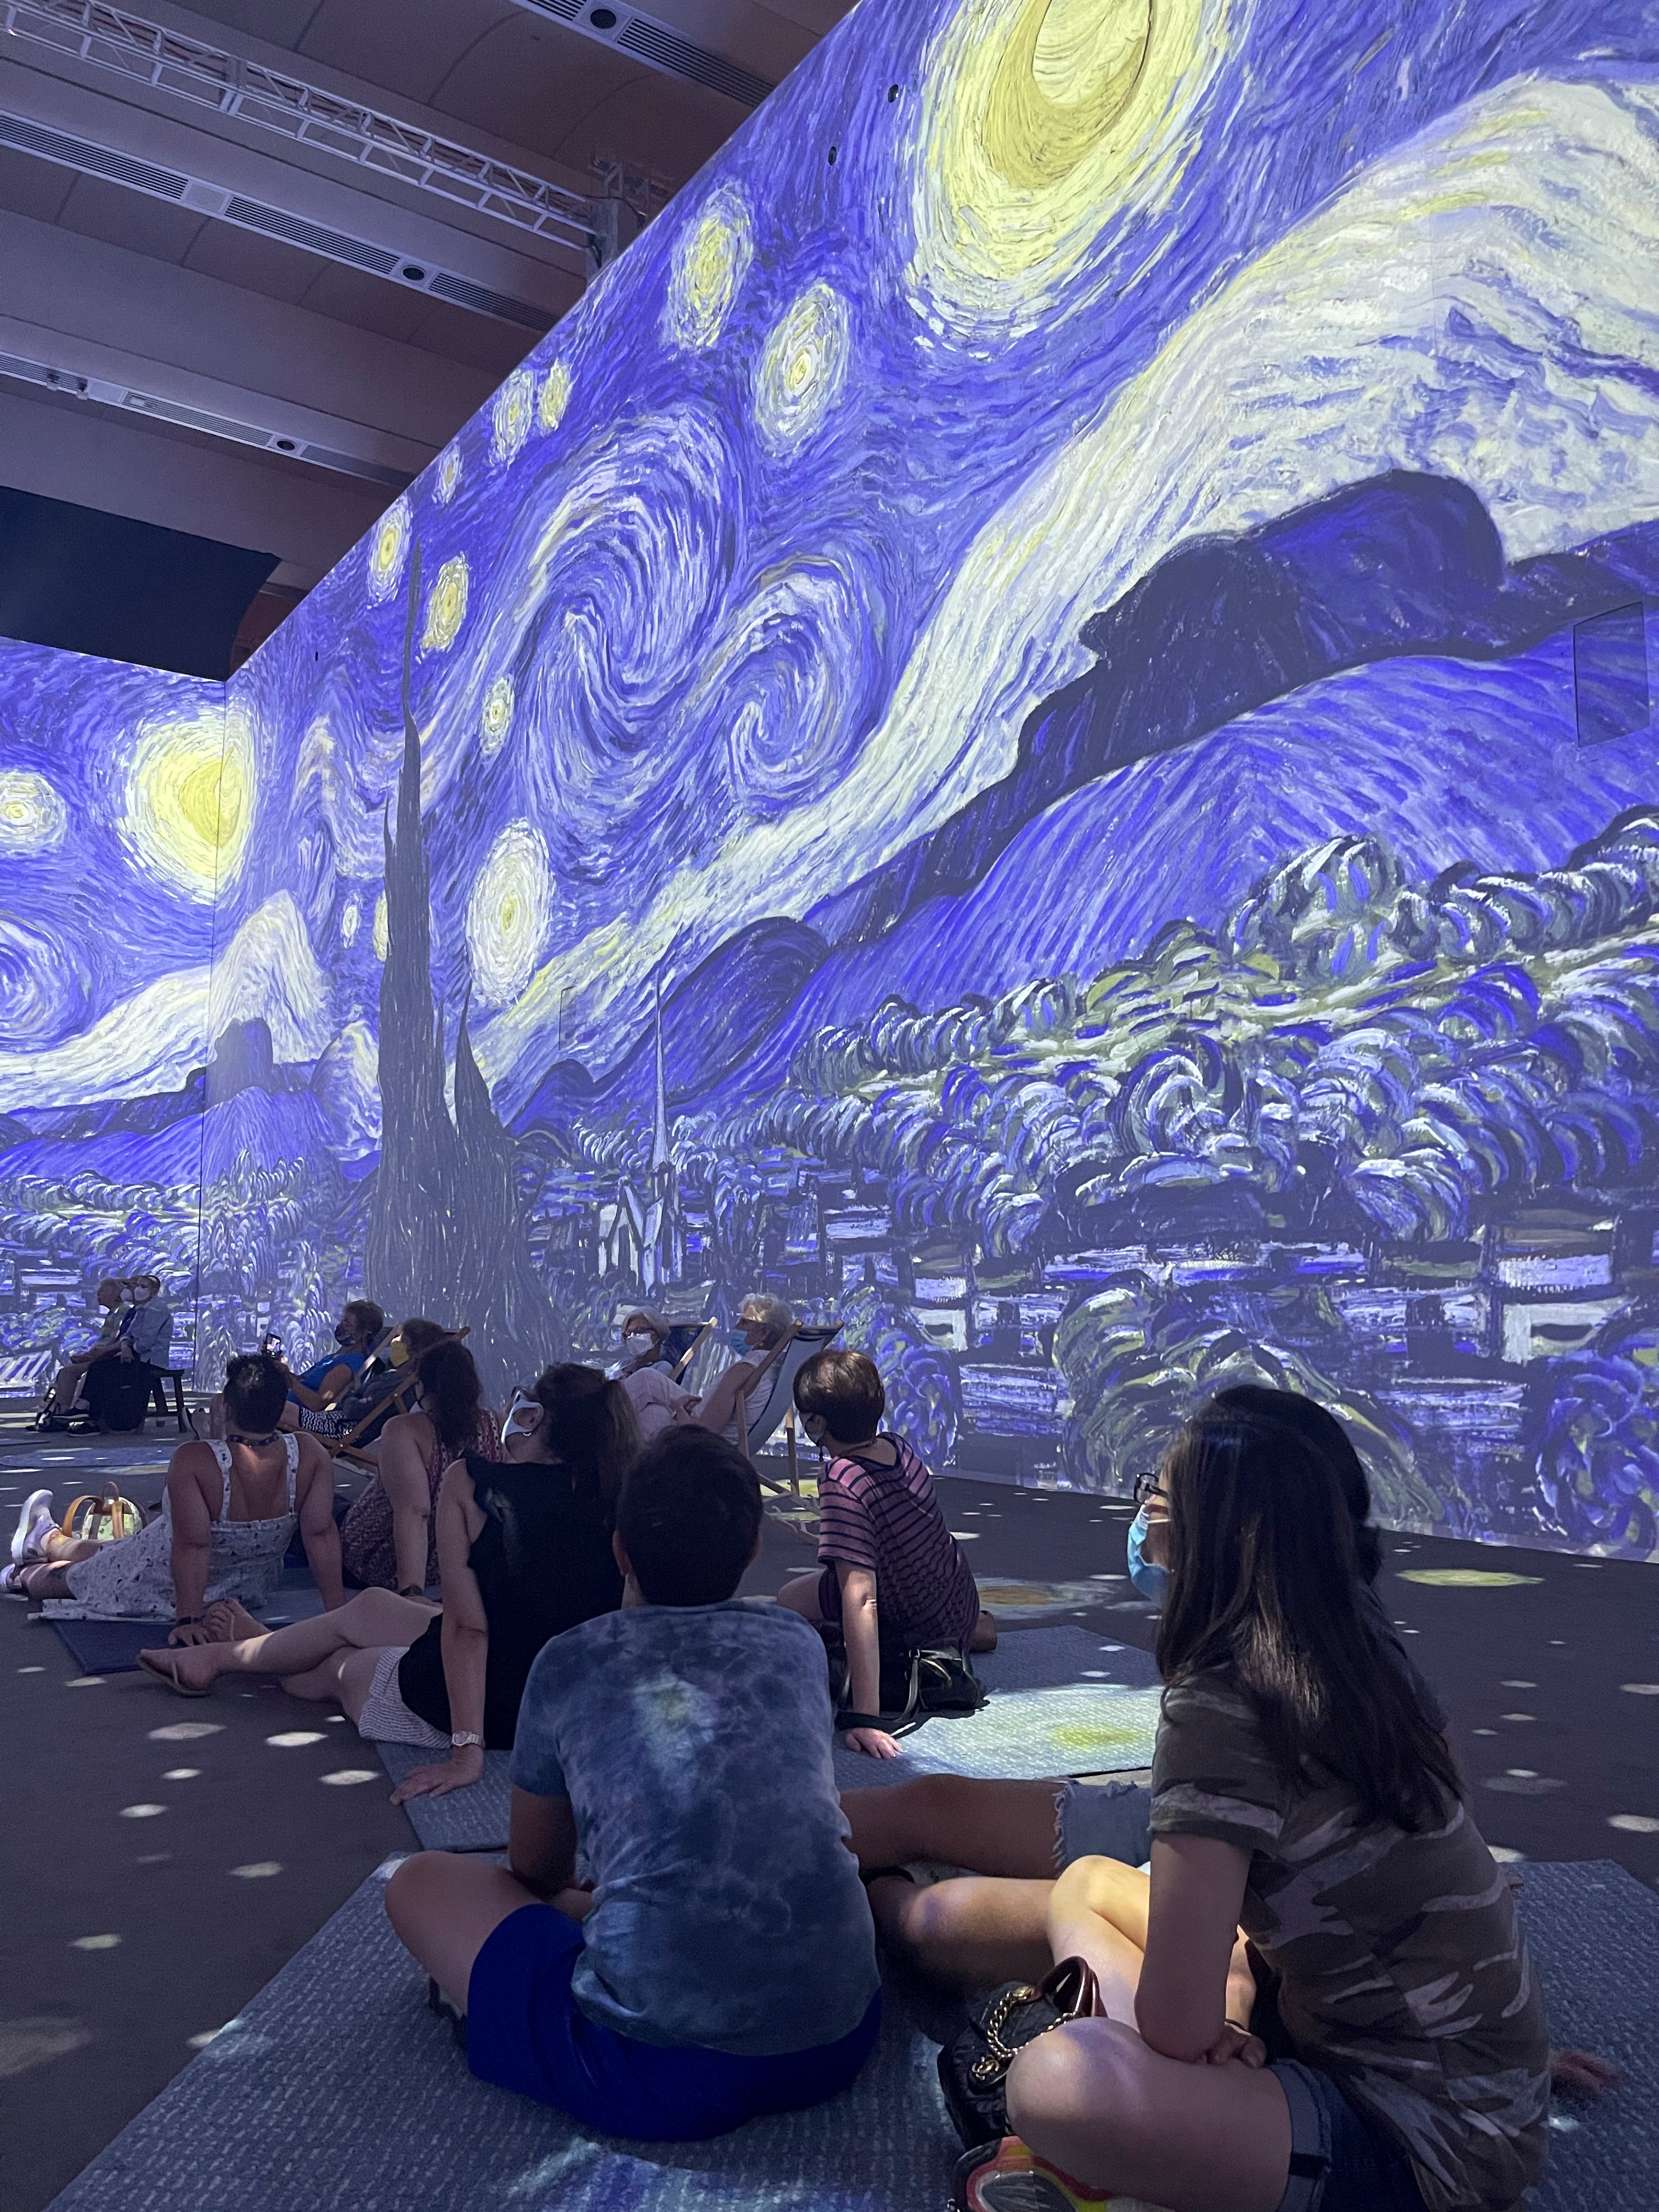 EB Visits Van Gogh Exhibit New York City: The Immersive Experience article image